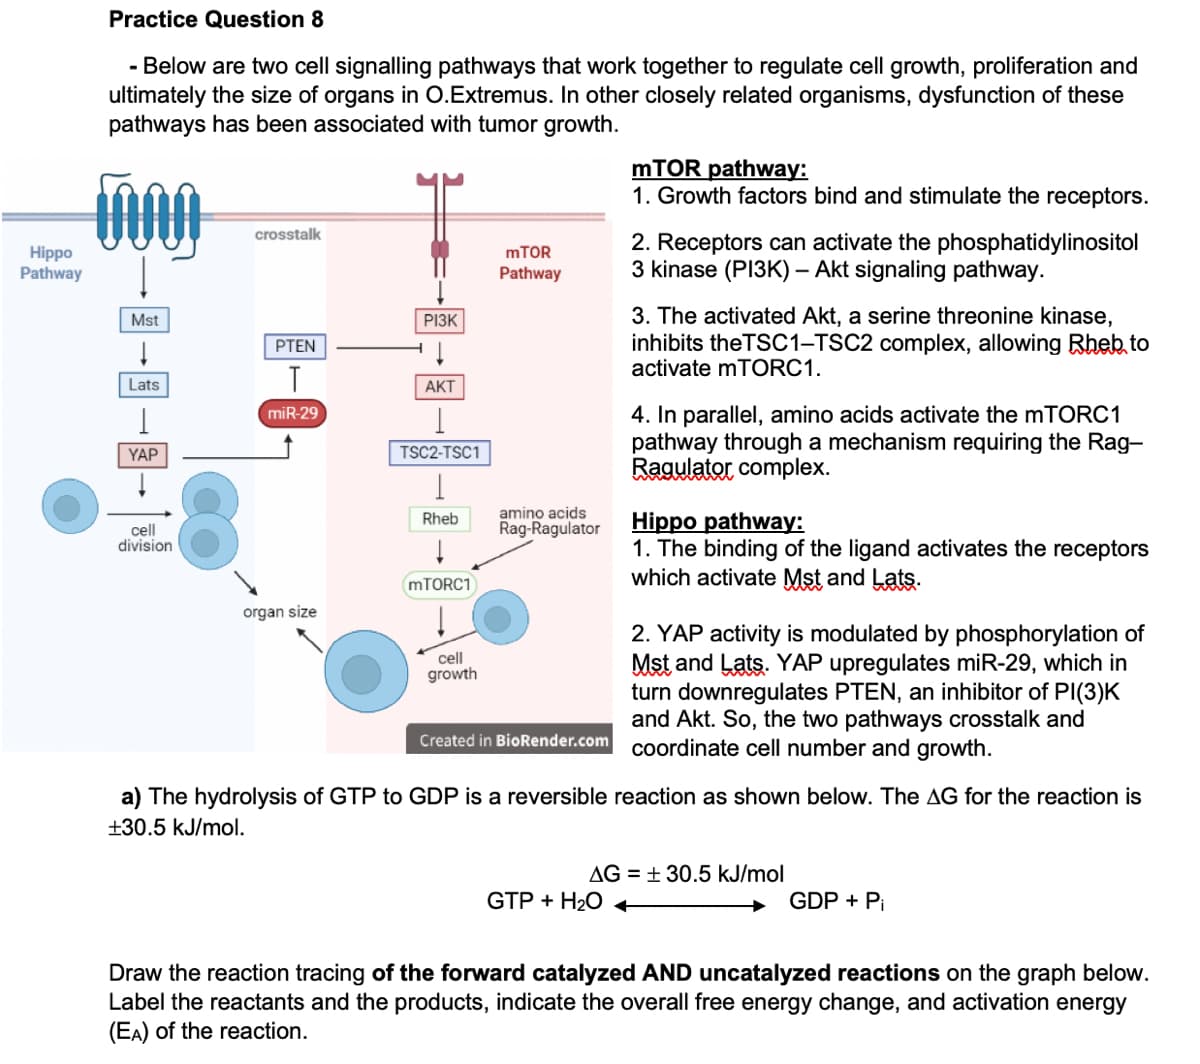 Practice Question 8
- Below are two cell signalling pathways that work together to regulate cell growth, proliferation and
ultimately the size of organs in O.Extremus. In other closely related organisms, dysfunction of these
pathways has been associated with tumor growth.
MTOR pathway:
1. Growth factors bind and stimulate the receptors.
crosstalk
Hippo
Pathway
2. Receptors can activate the phosphatidylinositol
3 kinase (PI3K) – Akt signaling pathway.
MTOR
Pathway
3. The activated Akt, a serine threonine kinase,
inhibits theTSC1-TSC2 complex, allowing Rheb to
activate mTORC1.
Mst
РІЗК
PTEN
Lats
АКТ
4. In parallel, amino acids activate the mTORC1
pathway through a mechanism requiring the Rag-
Ragulator complex.
miR-29
YAP
TSC2-TSC1
amino acids
Hippo pathway:
1. The binding of the ligand activates the receptors
which activate Mst and Lats.
Rheb
Rag-Ragulator
cell
division
MTORC1
organ size
2. YAP activity is modulated by phosphorylation of
Mst and Lats. YAP upregulates miR-29, which in
turn downregulates PTEN, an inhibitor of PI(3)K
and Akt. So, the two pathways crosstalk and
coordinate cell number and growth.
cell
growth
Created in BioRender.com
a) The hydrolysis of GTP to GDP is a reversible reaction as shown below. The AG for the reaction is
+30.5 kJ/mol.
AG = + 30.5 kJ/mol
GTP + H2O
GDP + Pi
Draw the reaction tracing of the forward catalyzed AND uncatalyzed reactions on the graph below.
Label the reactants and the products, indicate the overall free energy change, and activation energy
(EA) of the reaction.
